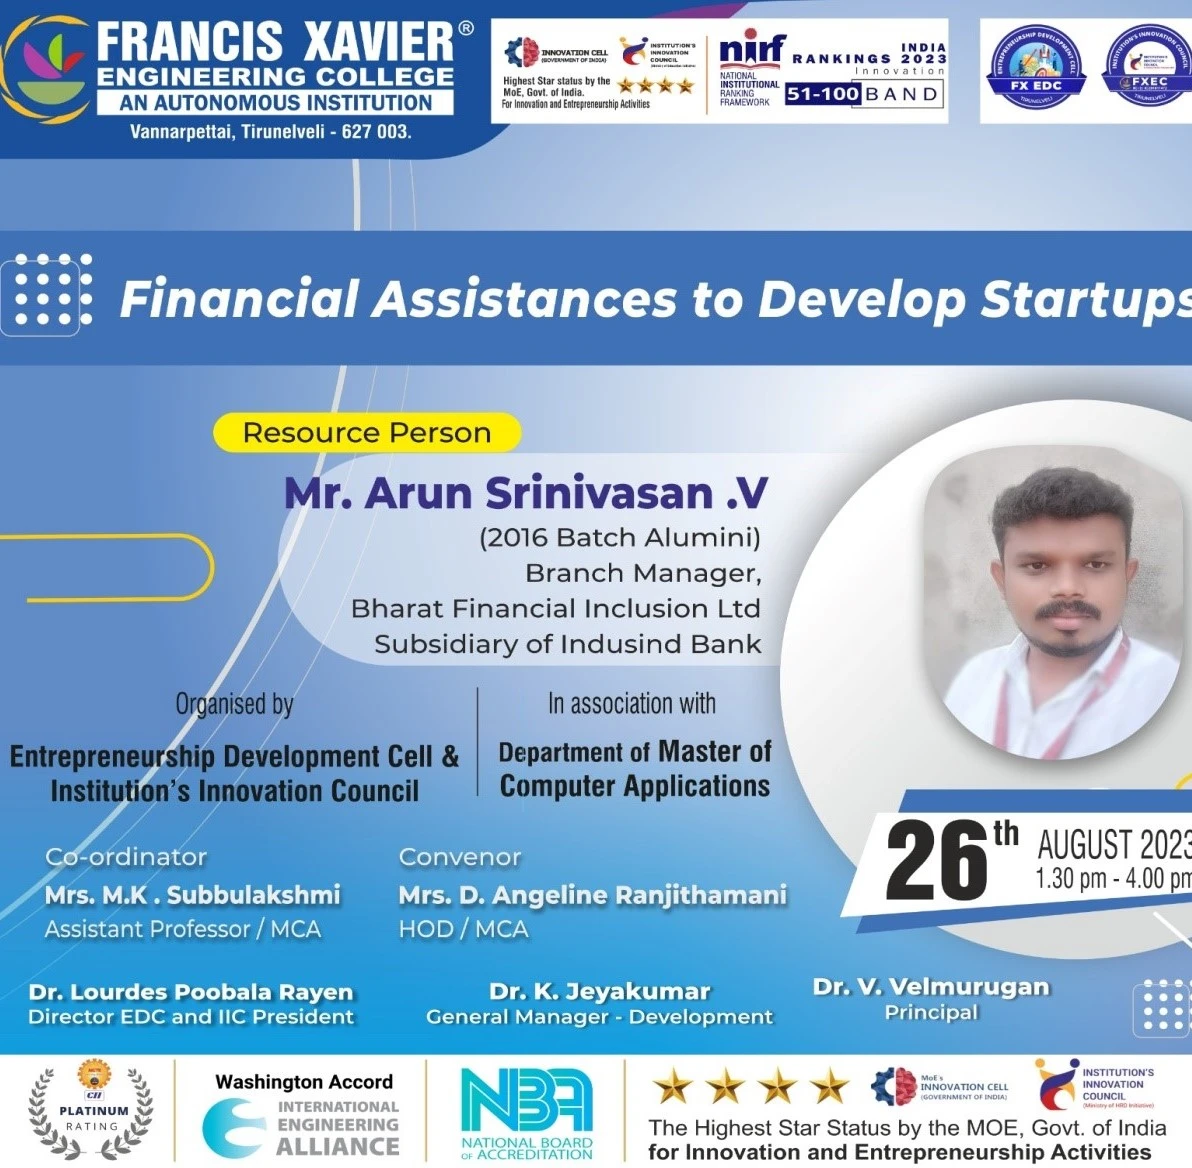 Financial Assistance to Develop Startups